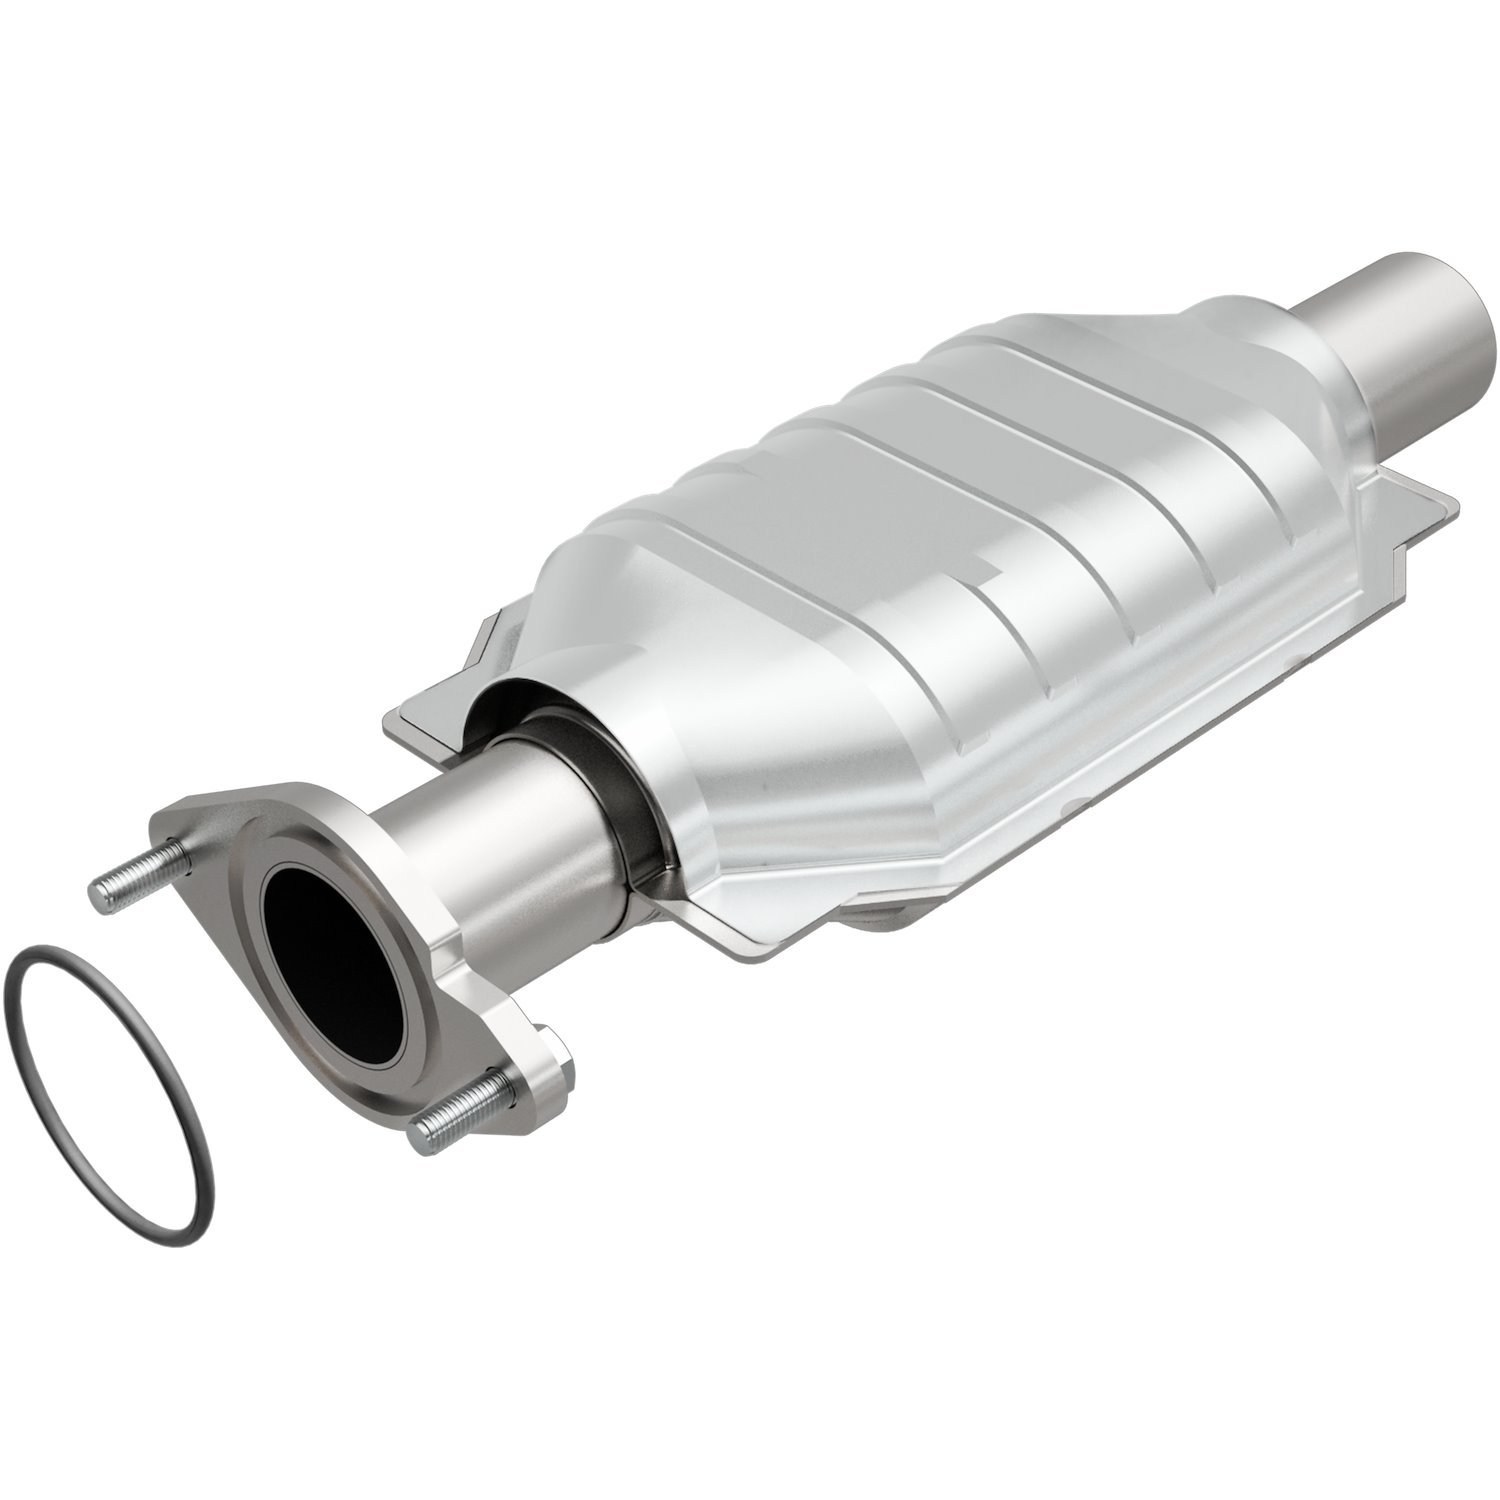 OEM Grade Federal / EPA Compliant Direct-Fit Catalytic Converter 51896